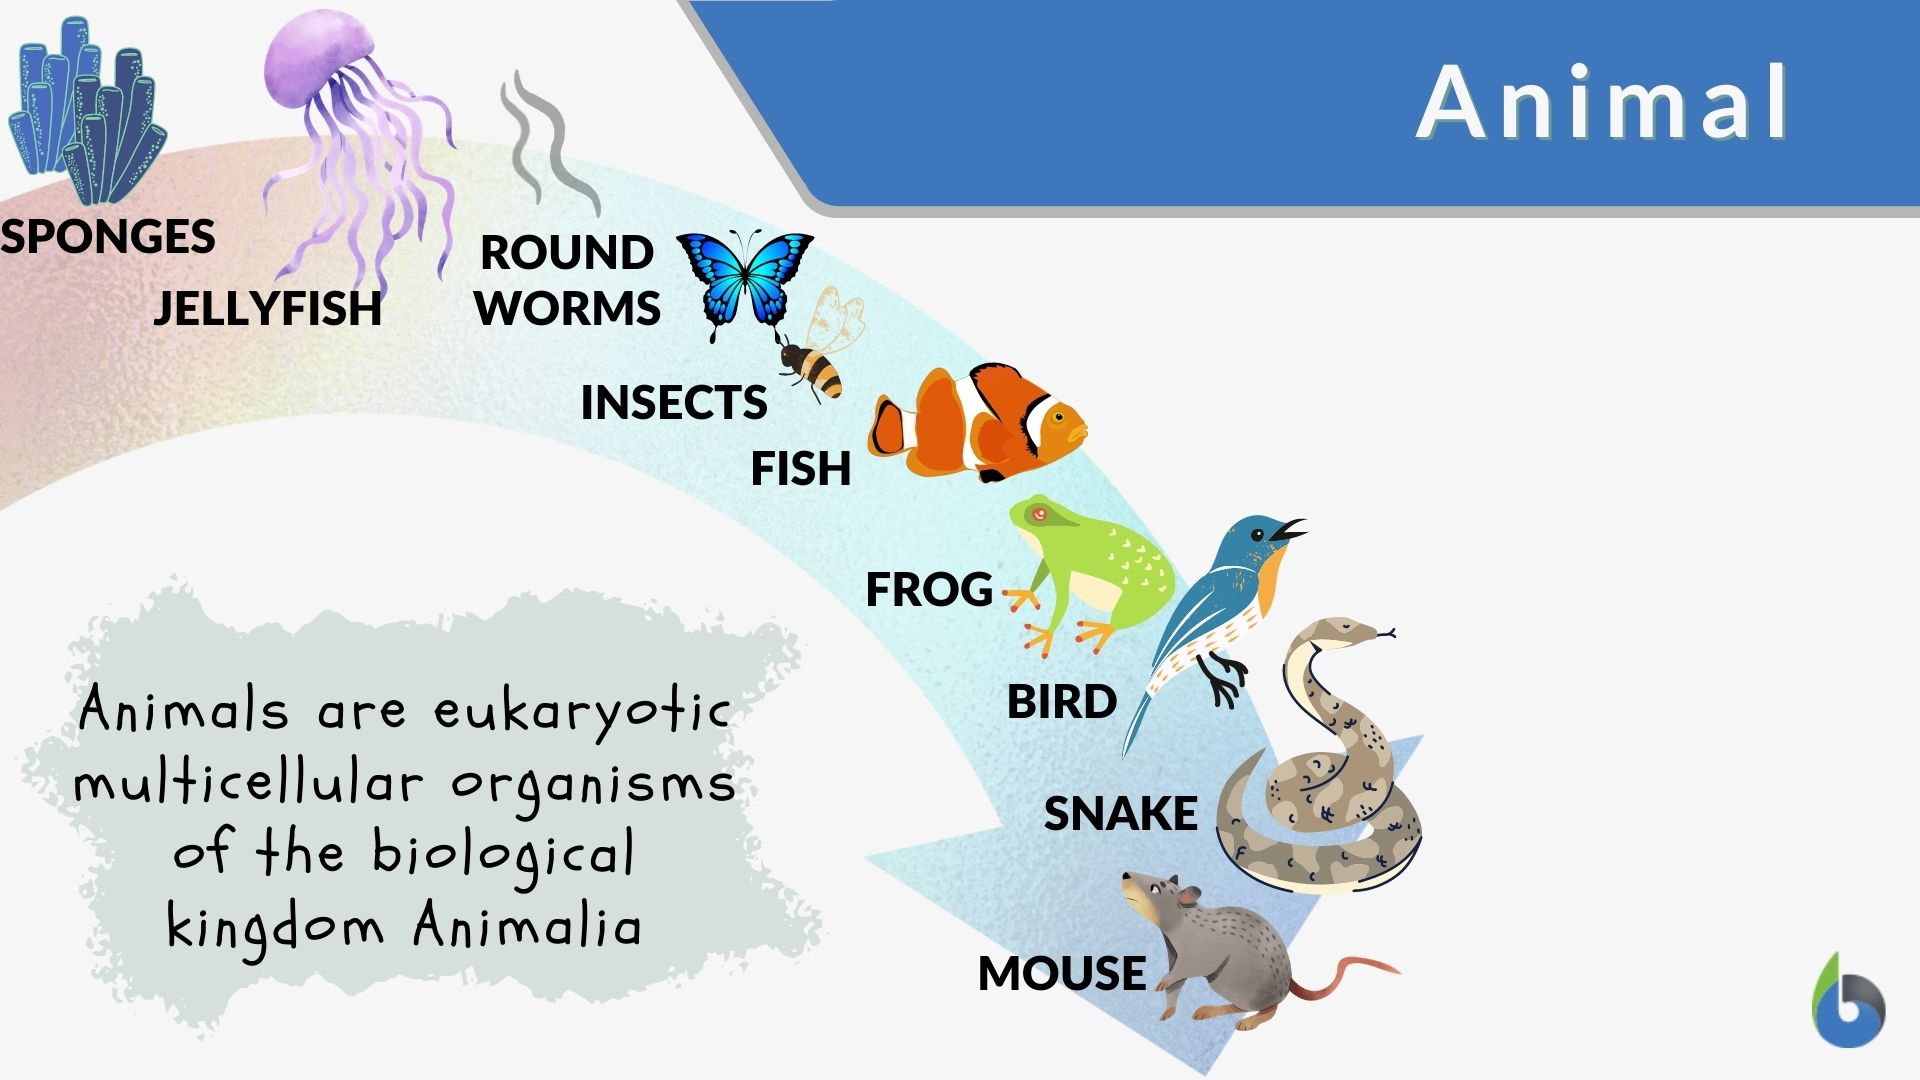 Animal - Definition and Examples - Biology Online Dictionary